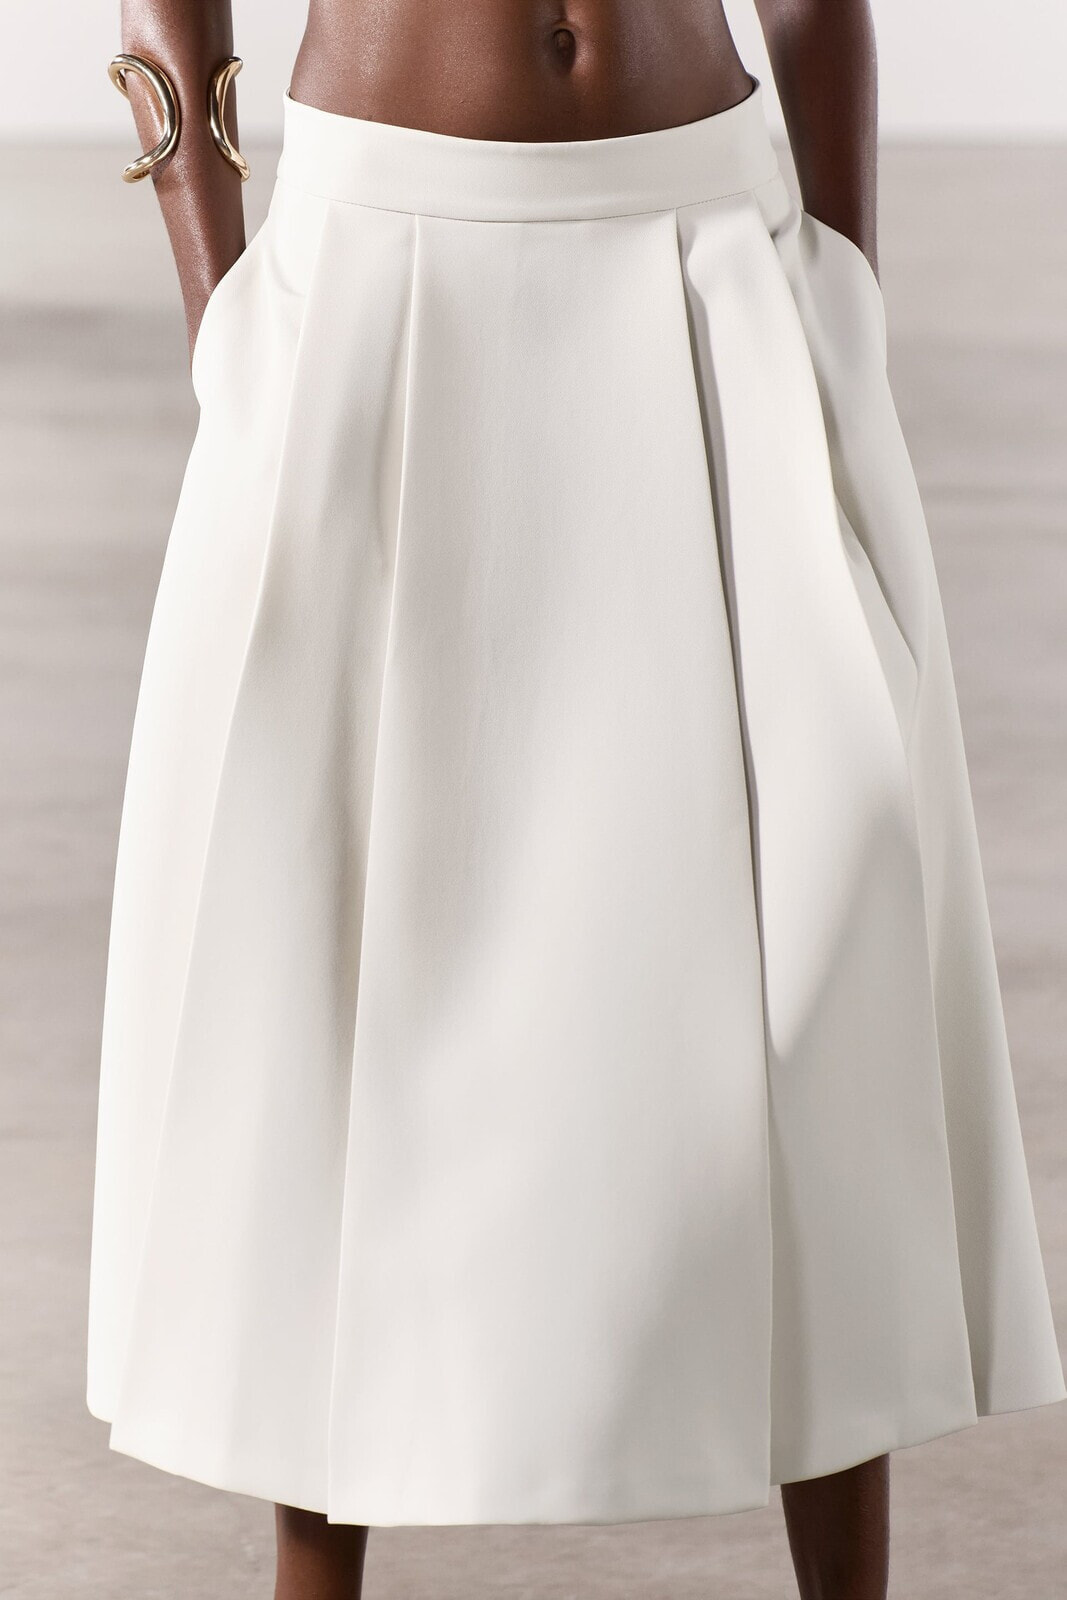 Zw collection box pleat layered skirt